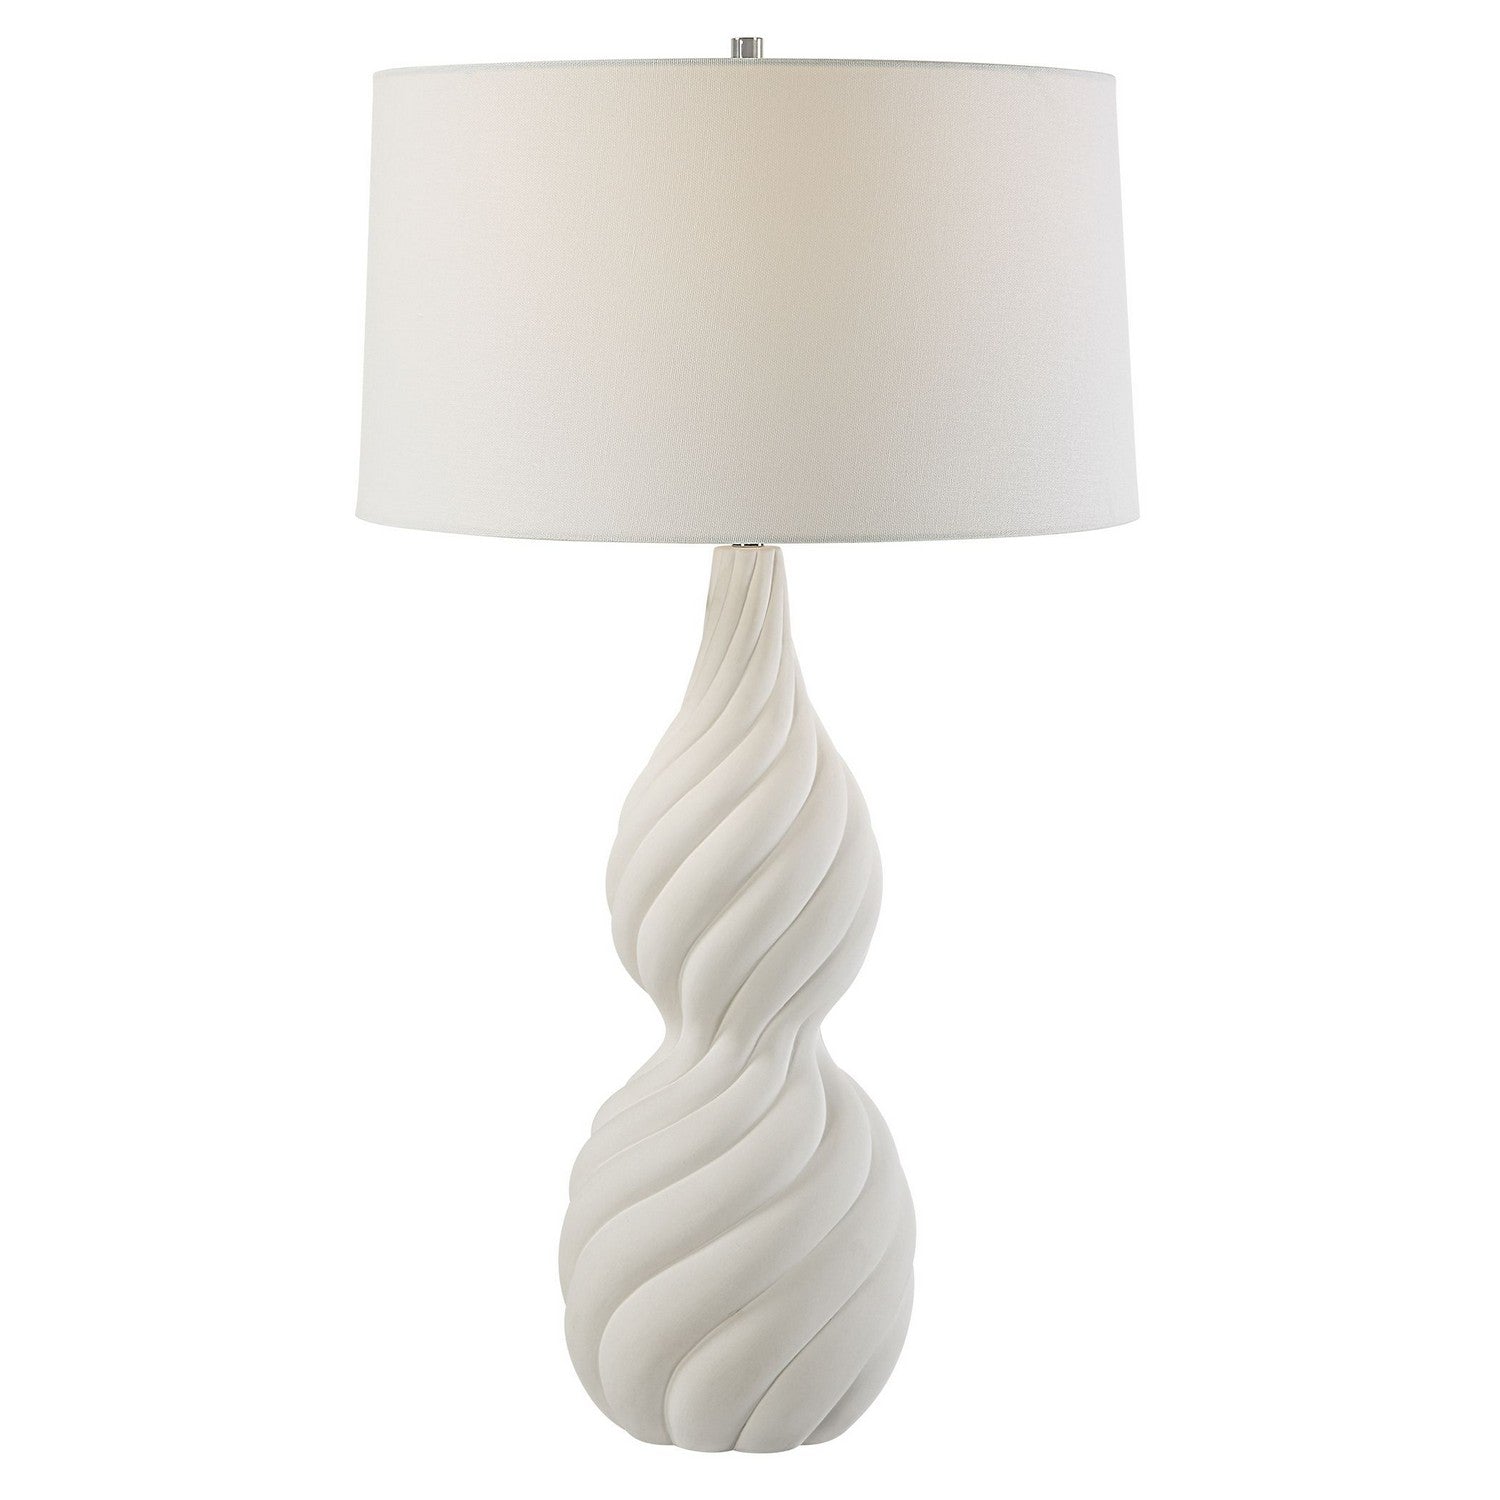 Uttermost - 30240 - One Light Table Lamp - Twisted Swirl - Polished Nickel